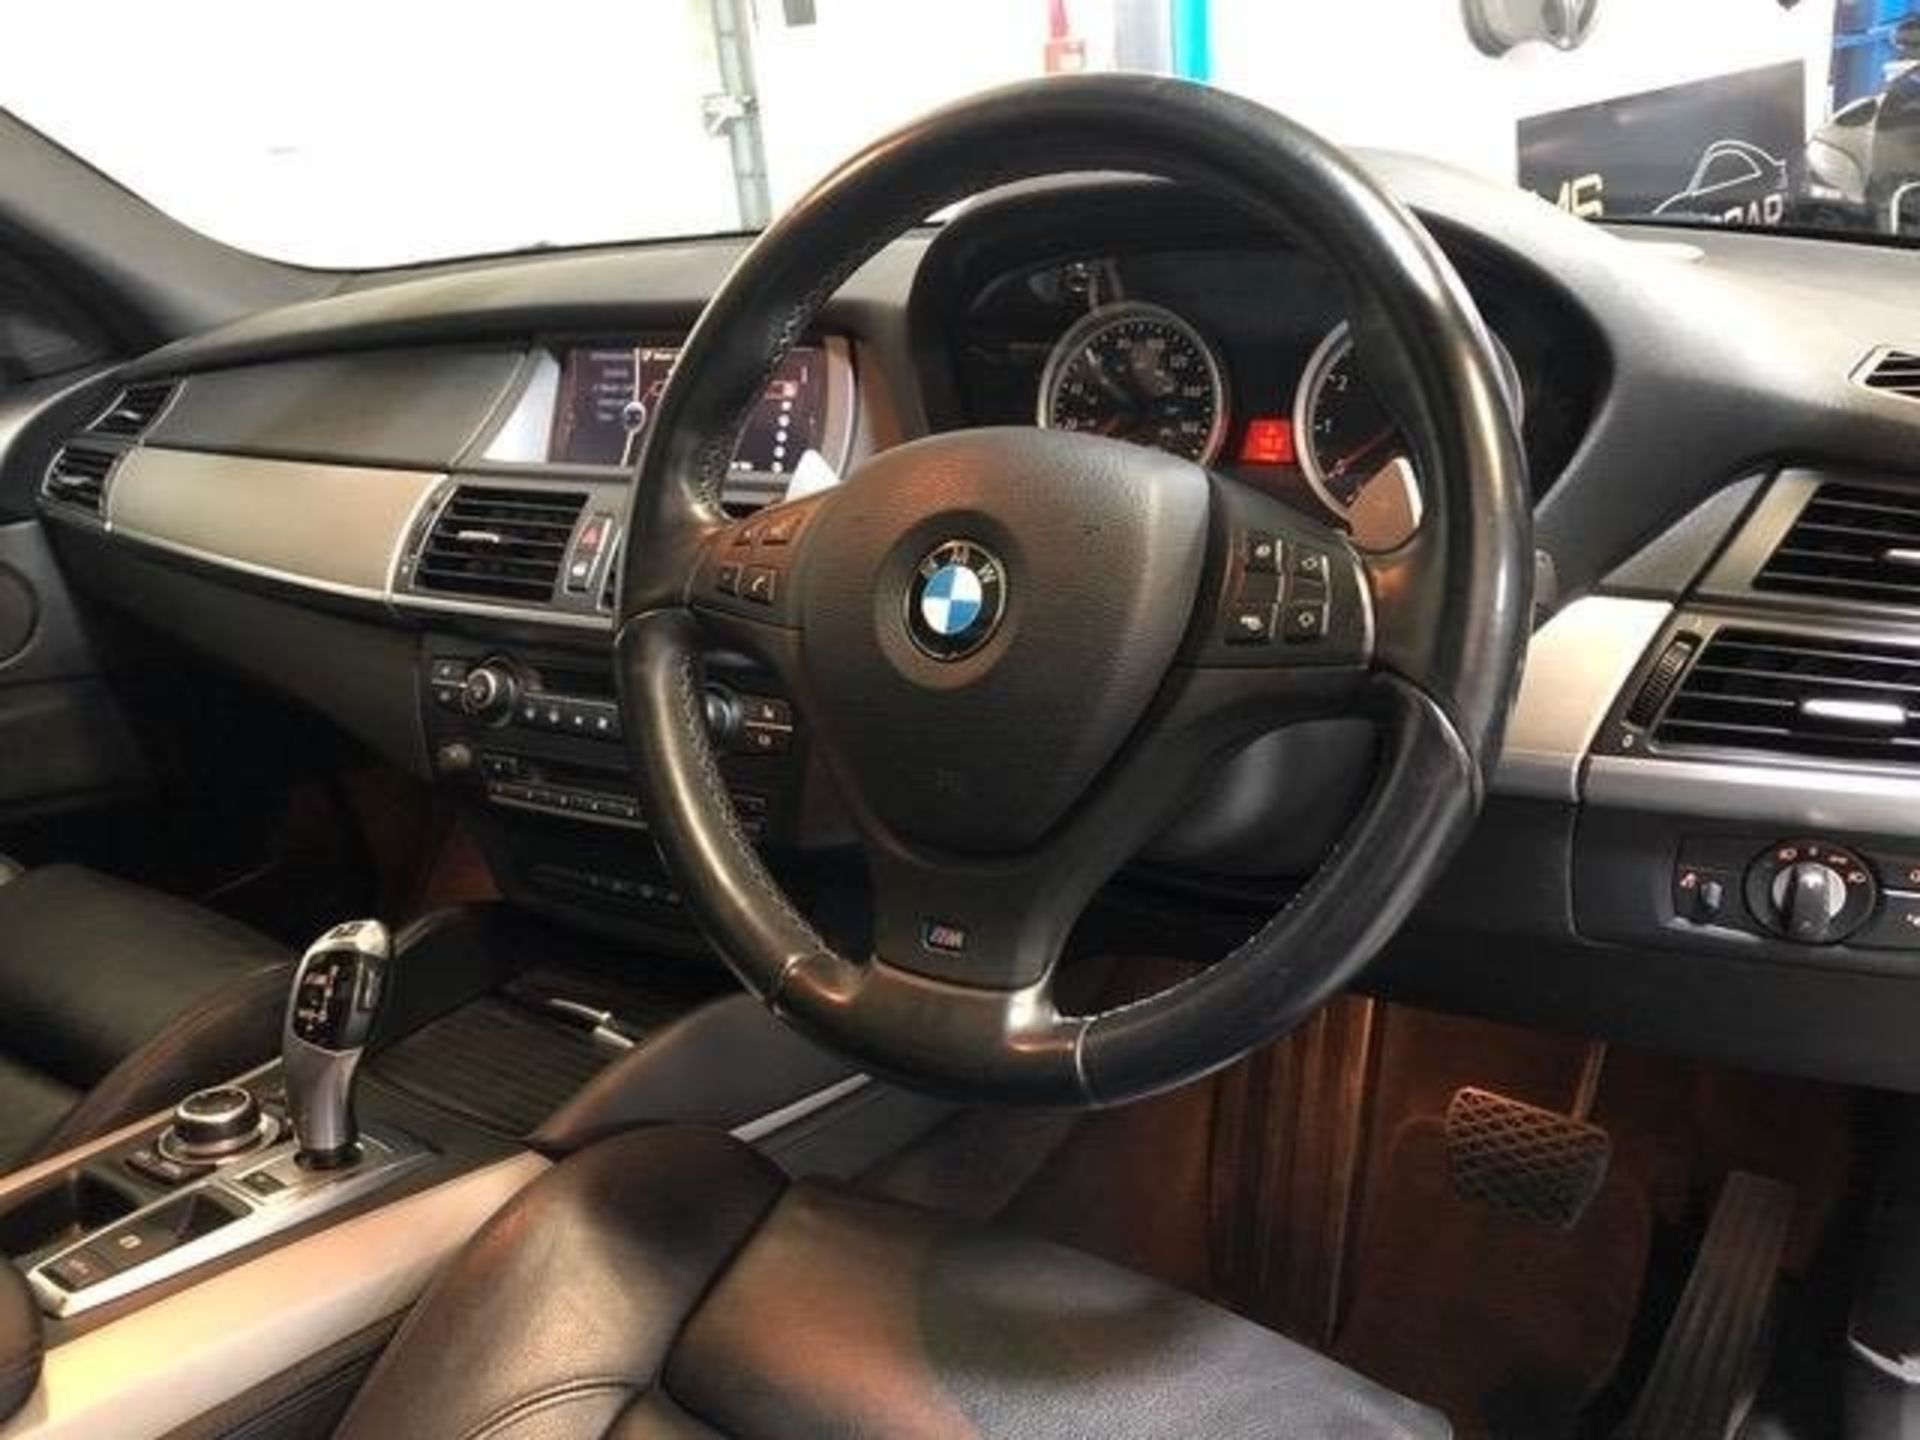 2009 BMW X5 M Registration Number:YH59 FFM Chassis Number: TBA Recorded Mileage: 125,000 miles - Two - Image 8 of 17